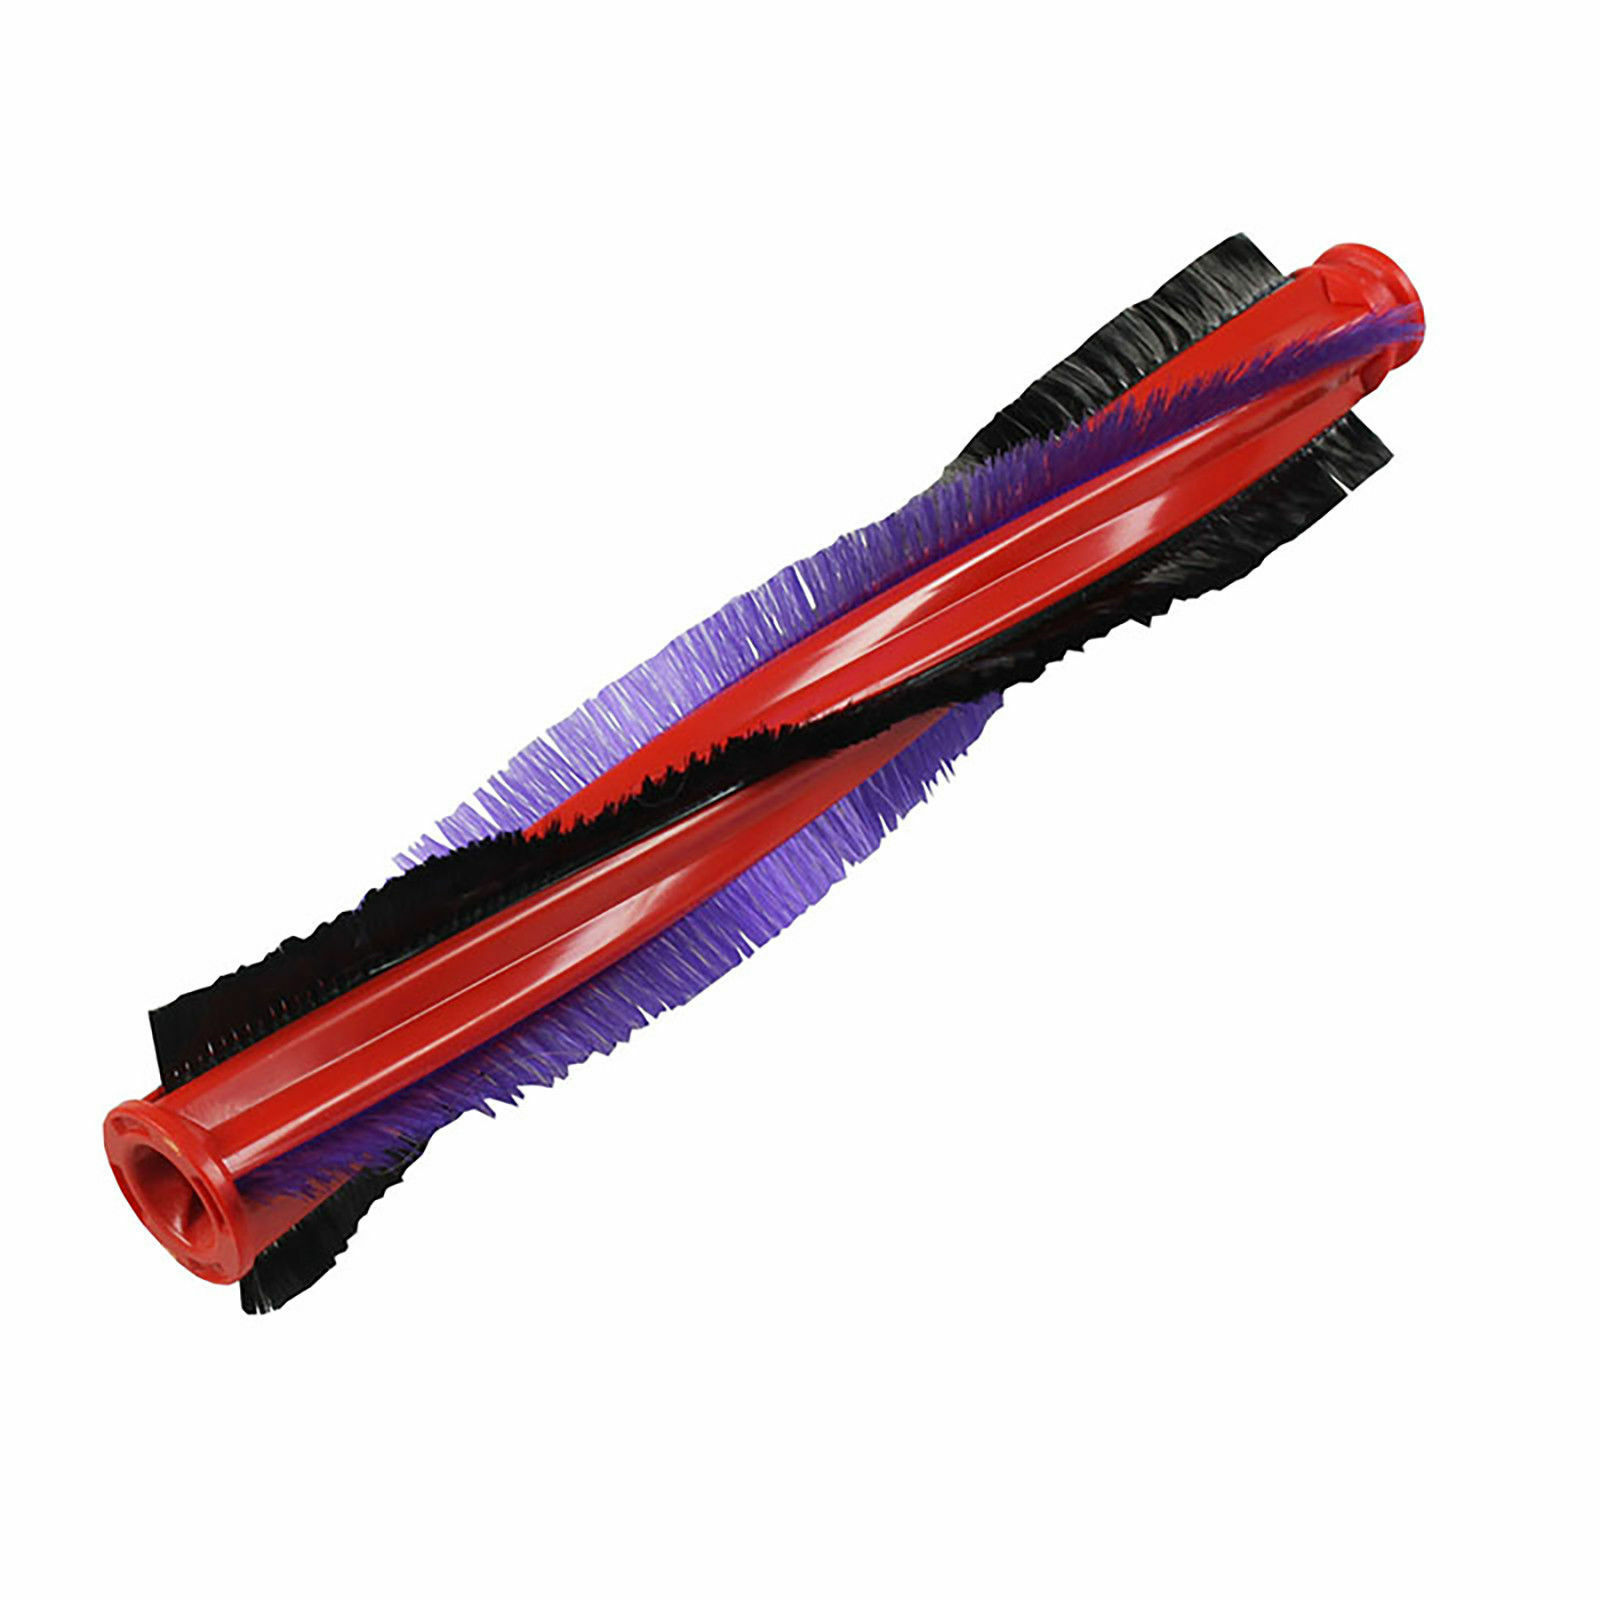 Replacement Brush Roller Bar for Dyson V6 Vacuum 